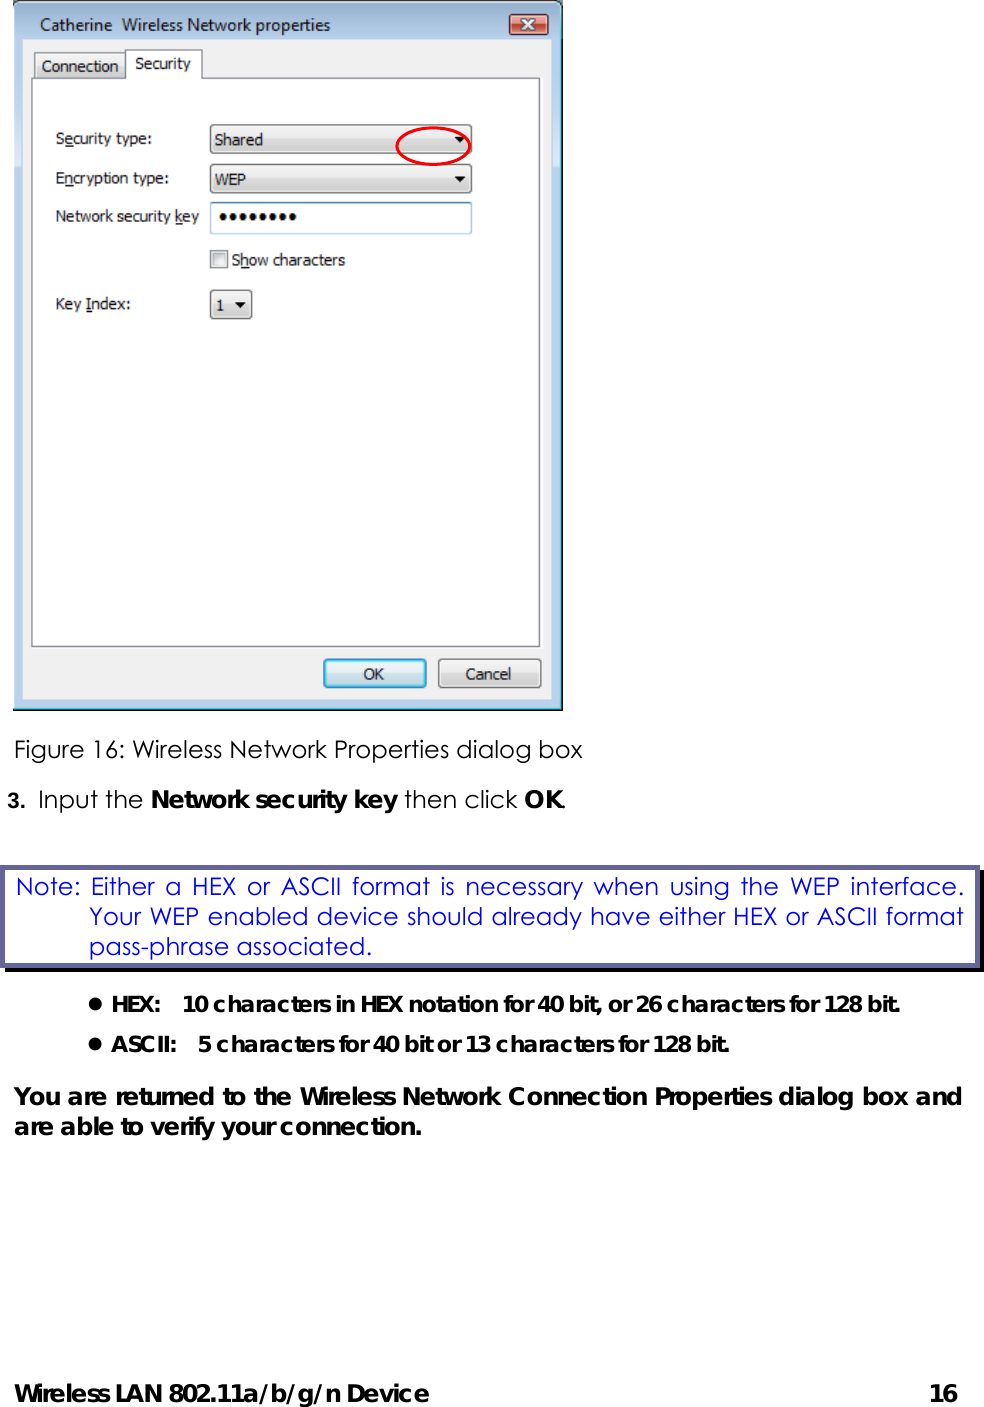 Wireless LAN 802.11a/b/g/n Device                                         16  Figure 16: Wireless Network Properties dialog box 3.  Input the Network security key then click OK. z HEX:    10 characters in HEX notation for 40 bit, or 26 characters for 128 bit. z ASCII:    5 characters for 40 bit or 13 characters for 128 bit. You are returned to the Wireless Network Connection Properties dialog box and are able to verify your connection.      Note: Either a HEX or ASCII format is necessary when using the WEP interface. Your WEP enabled device should already have either HEX or ASCII format pass-phrase associated.   